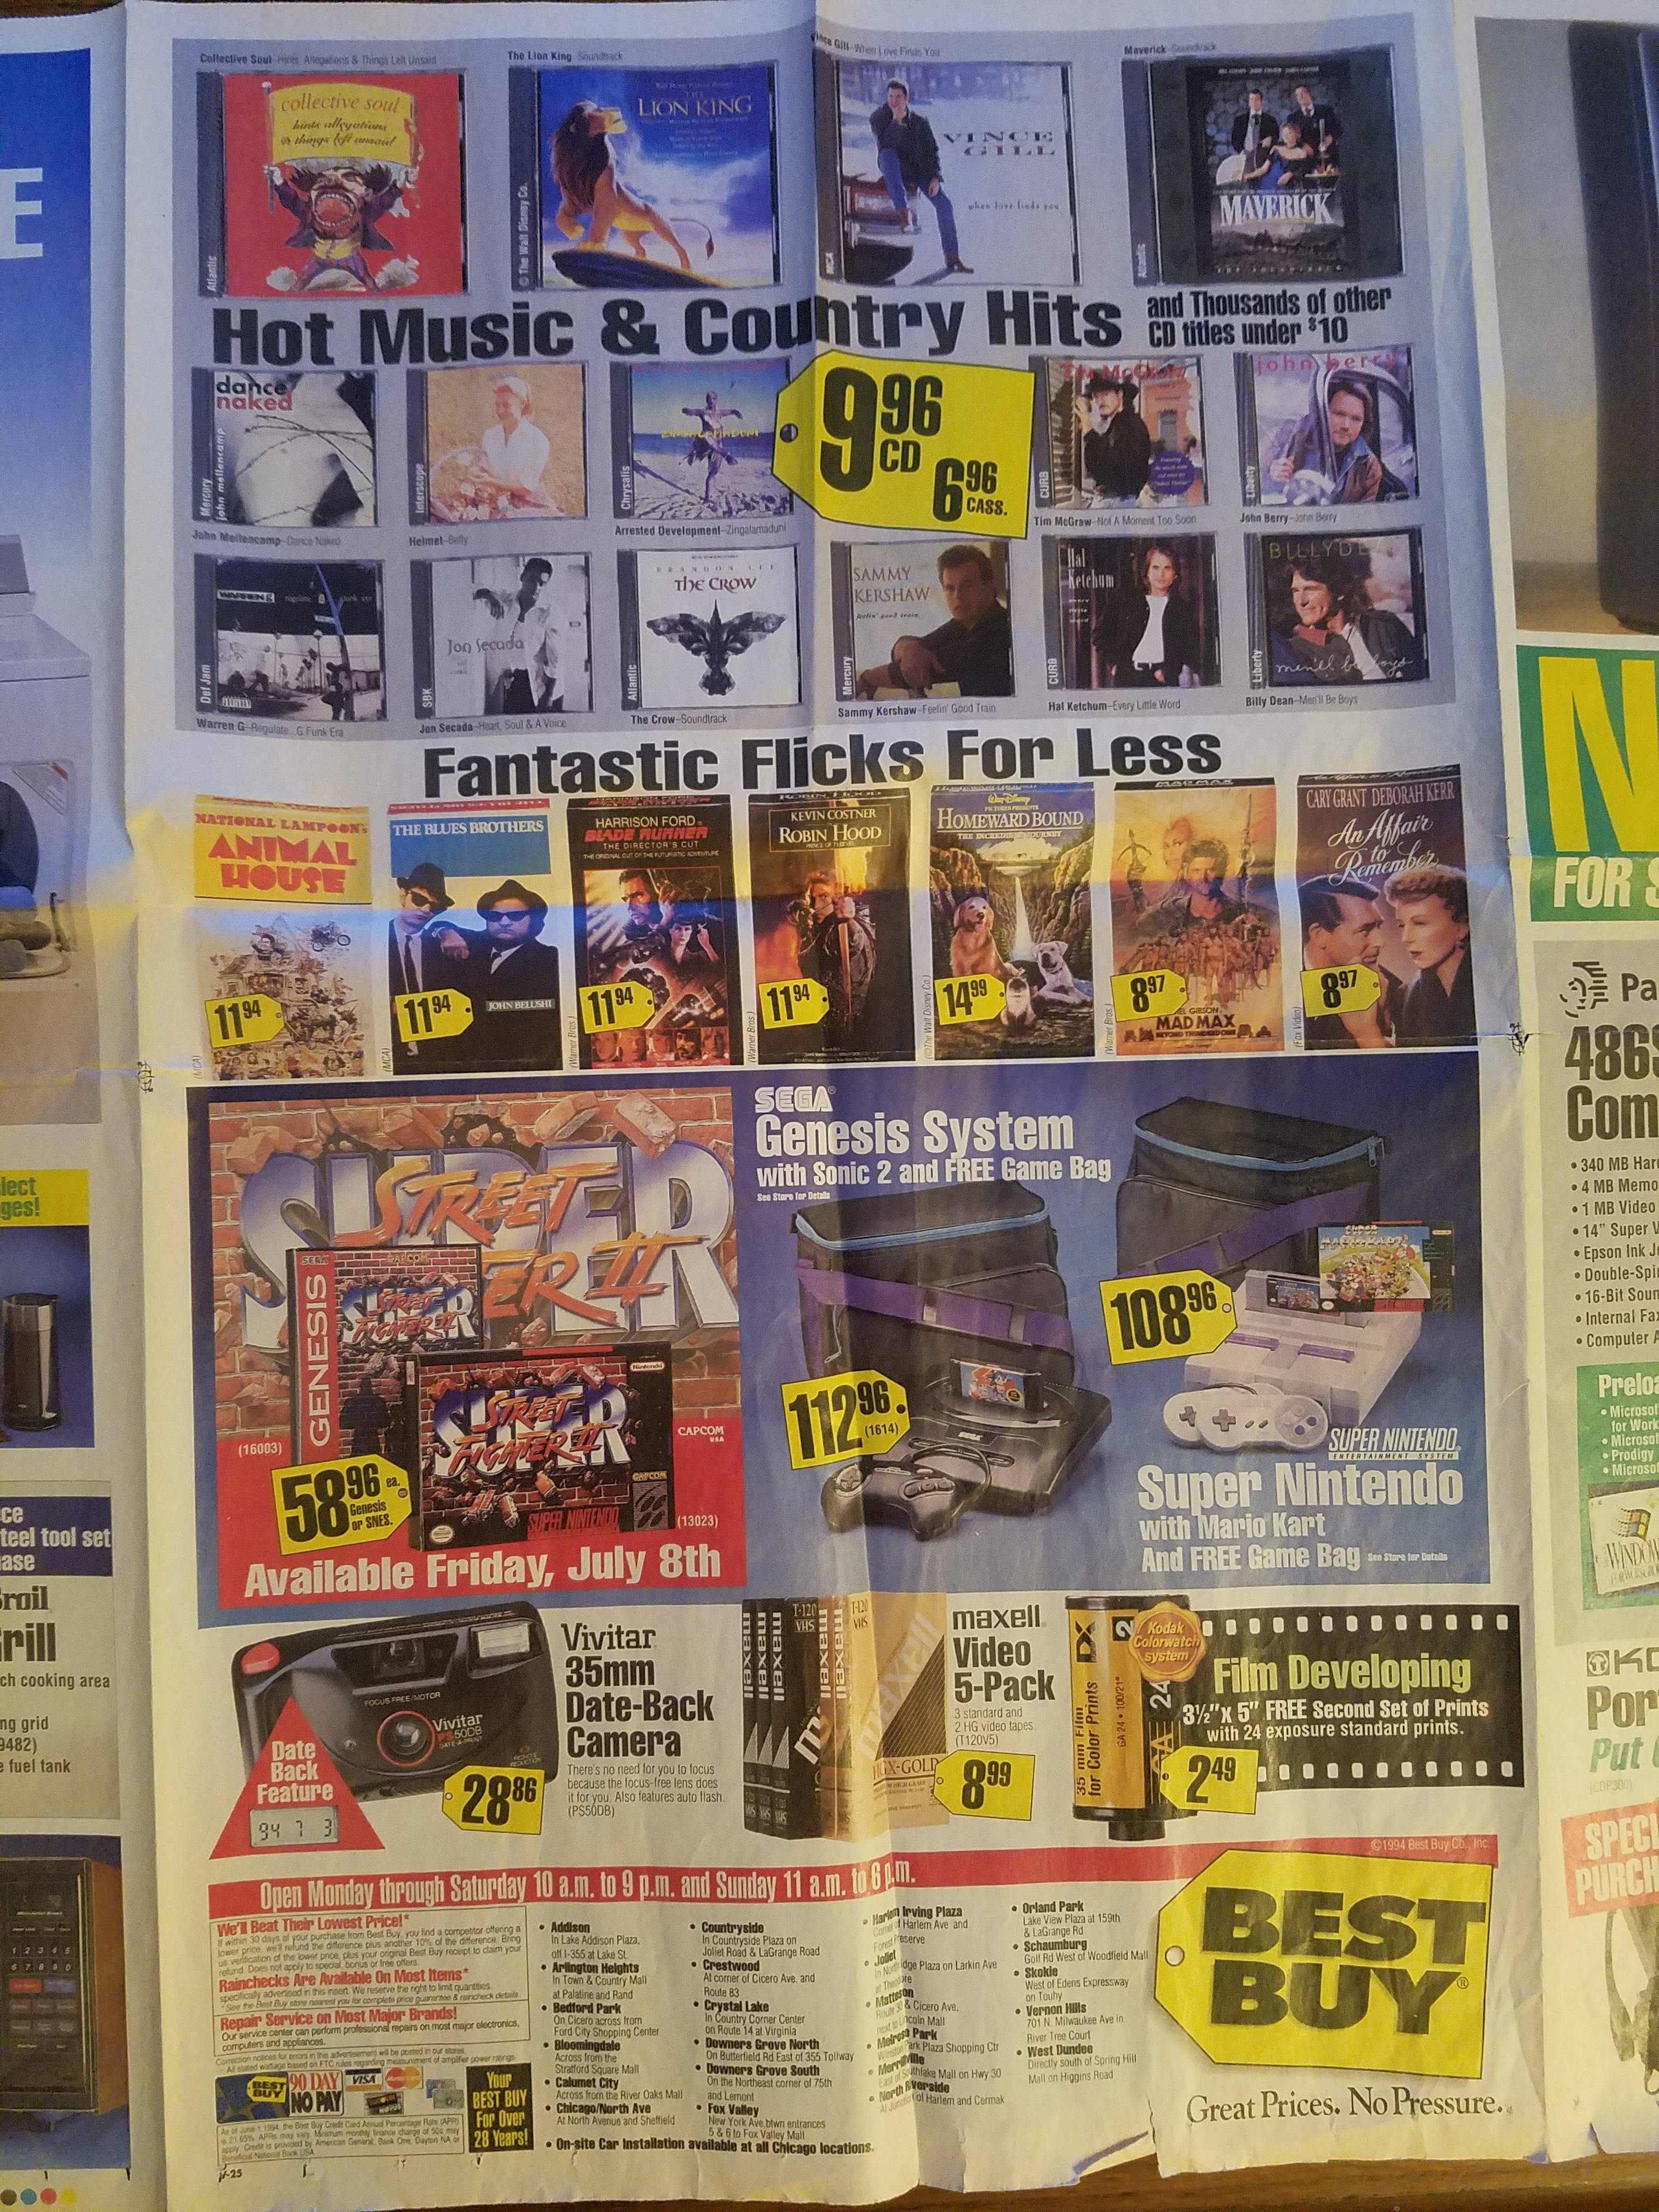 old best buy ad - E Hot Music & Country Hits a la 1096 Lu Fantastic Flicks For Less For Pa 486 Cenesis System W 2 108 Super Nintendo Available Friday, July 8th Vides Developing DateBack Por In Best Bu firati. Na